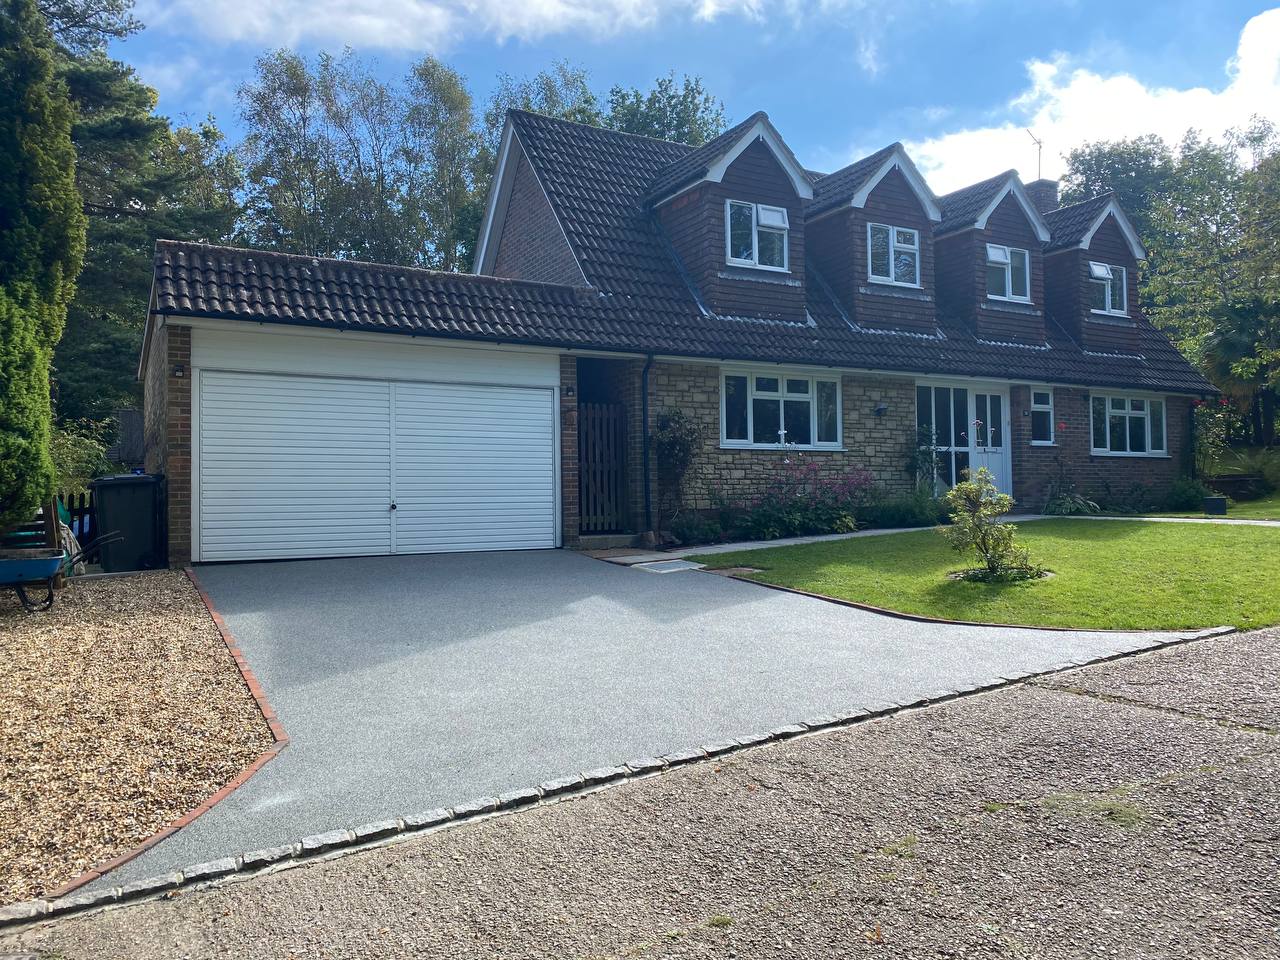 This is a photo of a resin driveway installed in Ipswich by Ipswich Resin Driveways